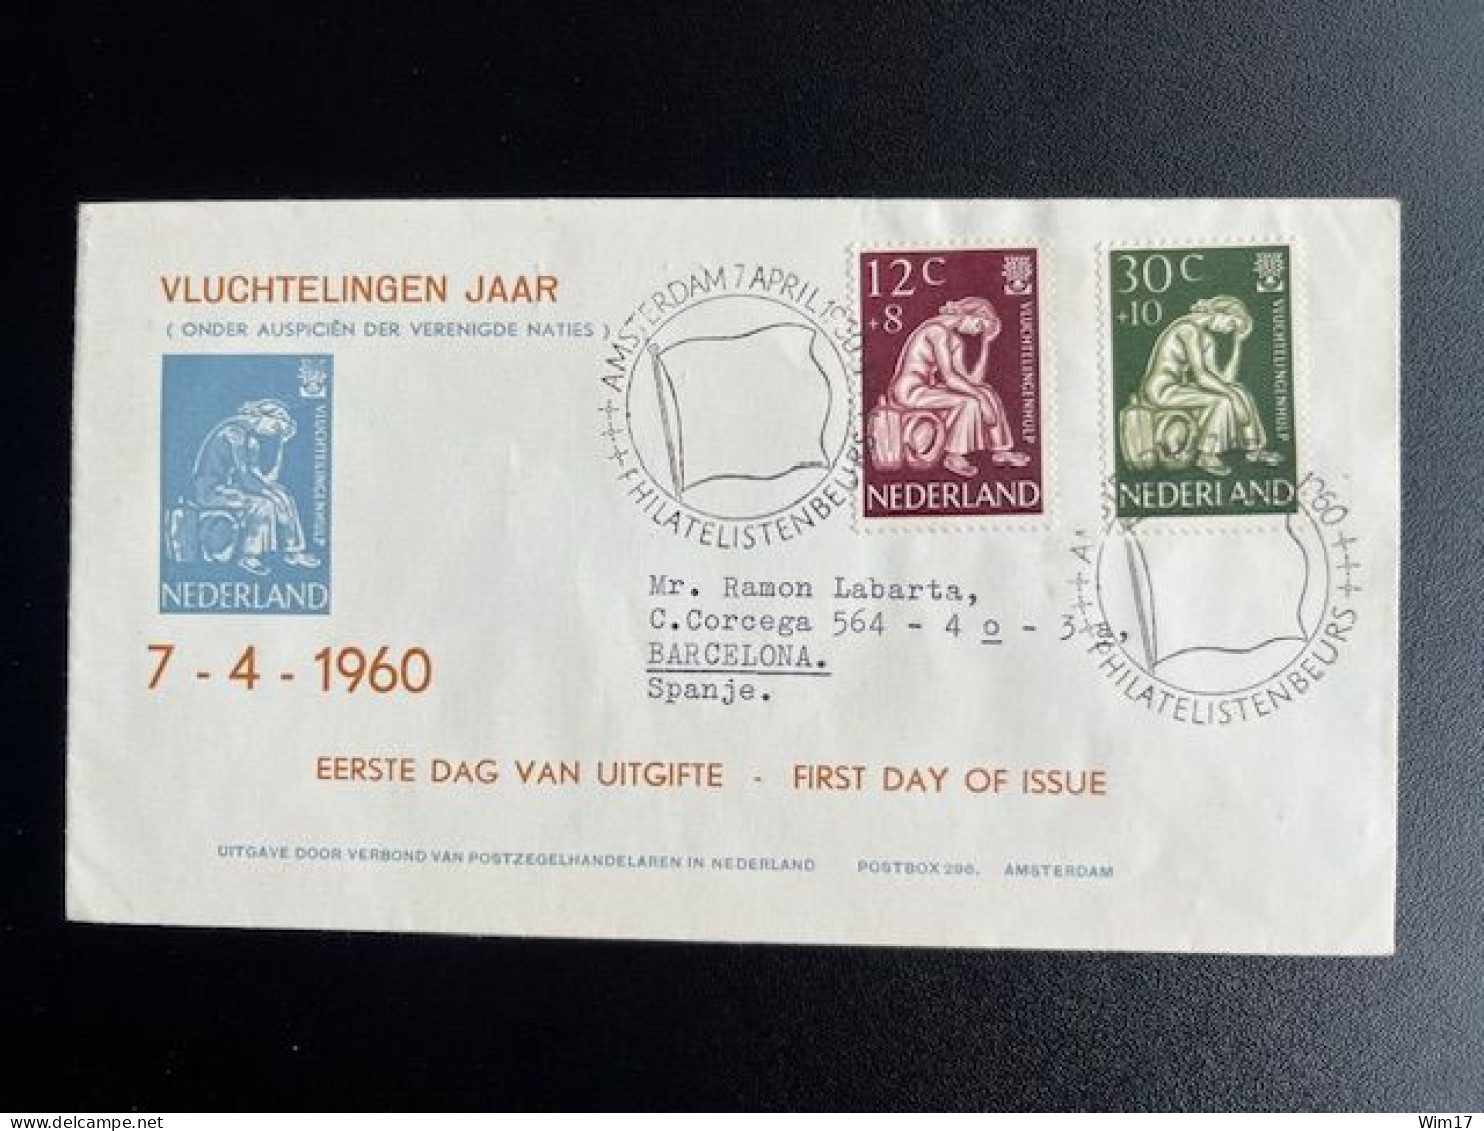 NETHERLANDS 1960 CIRCULATED FDC WORLD REFUGEE YEAR SEND TO BARCELONA 07-04-1960 NEDERLAND E42 - FDC